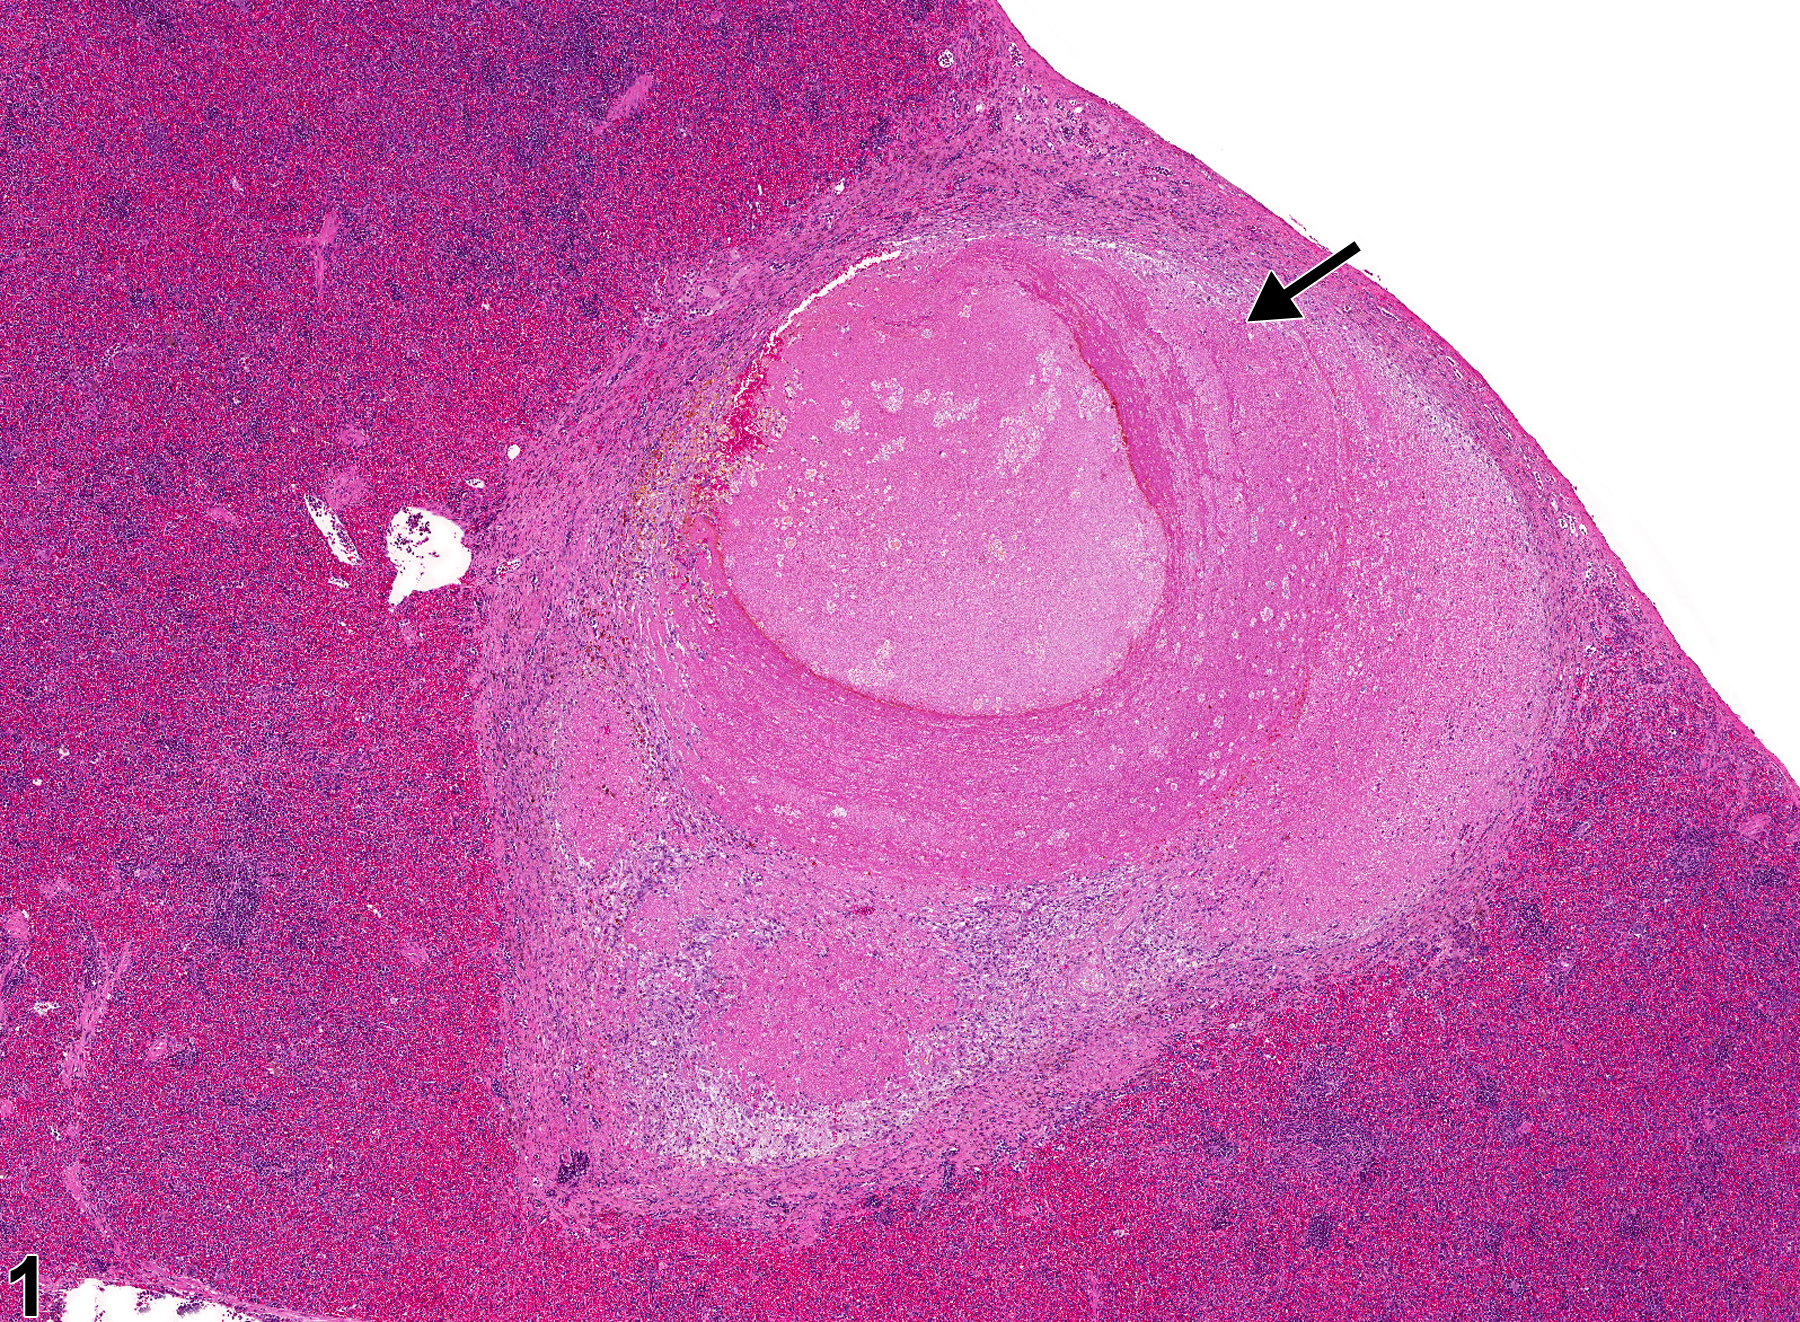 Image of necrosis in the spleen from a male F344/N rat in a chronic study